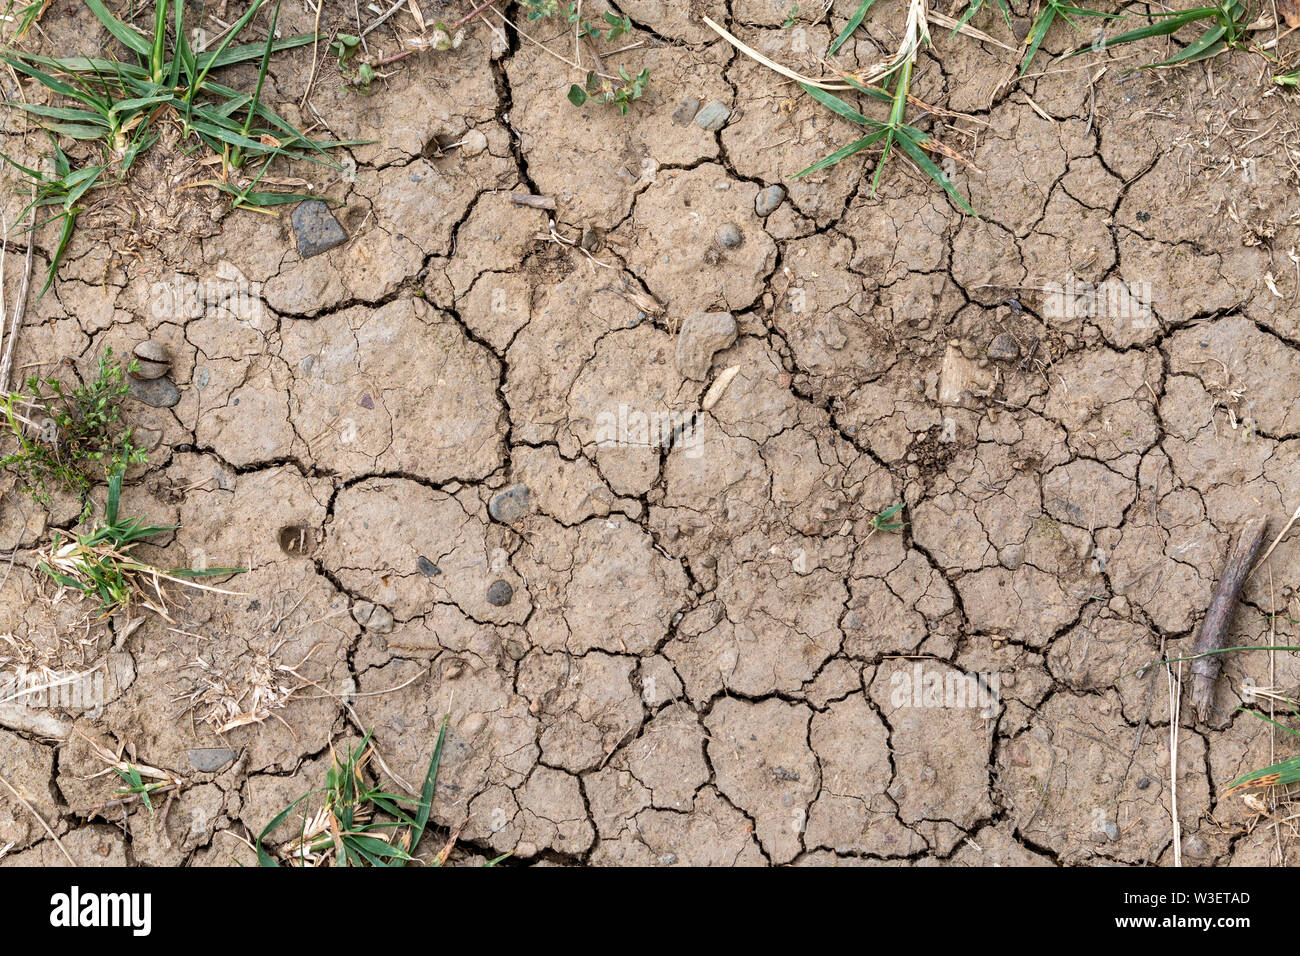 Cracked dry earth, overhead view. Environmental concerns and climate change concept. Stock Photo